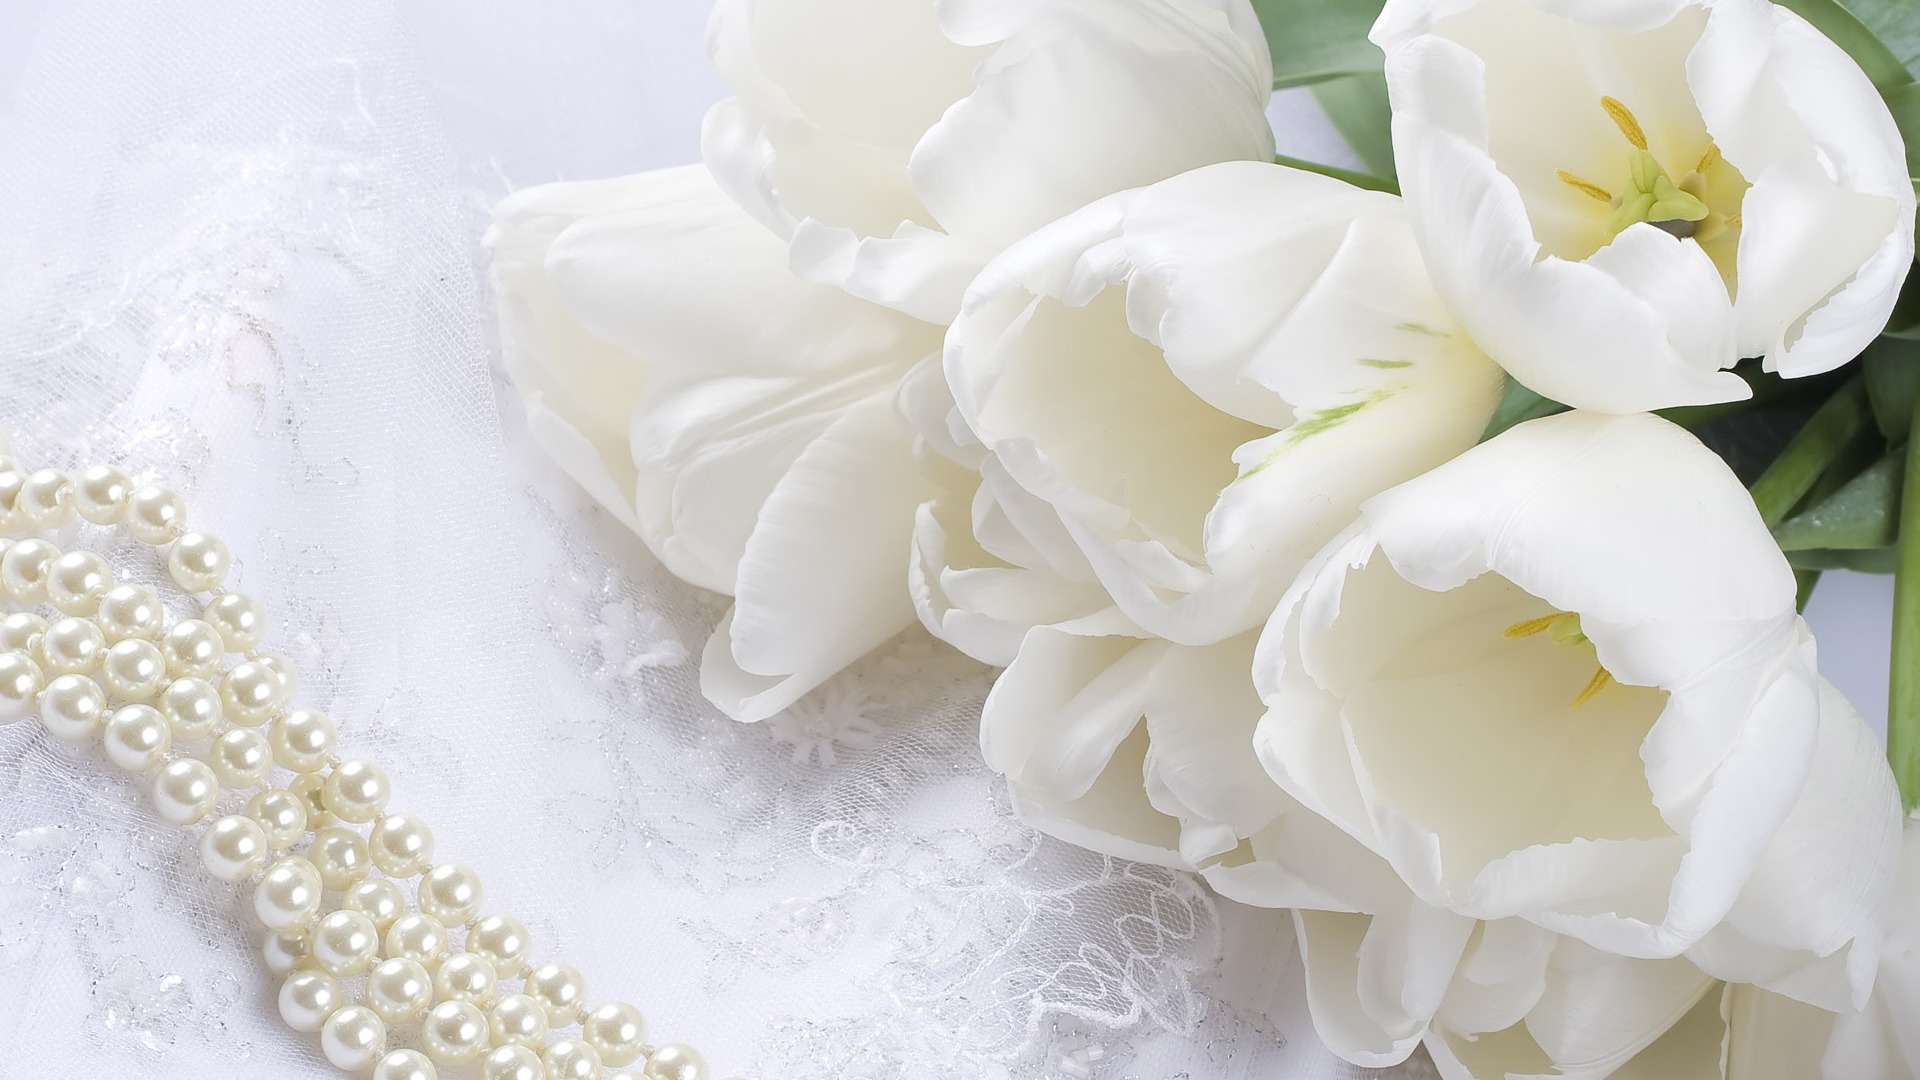 Weddings and Flowers wallpaper (1) #3 - 1920x1080